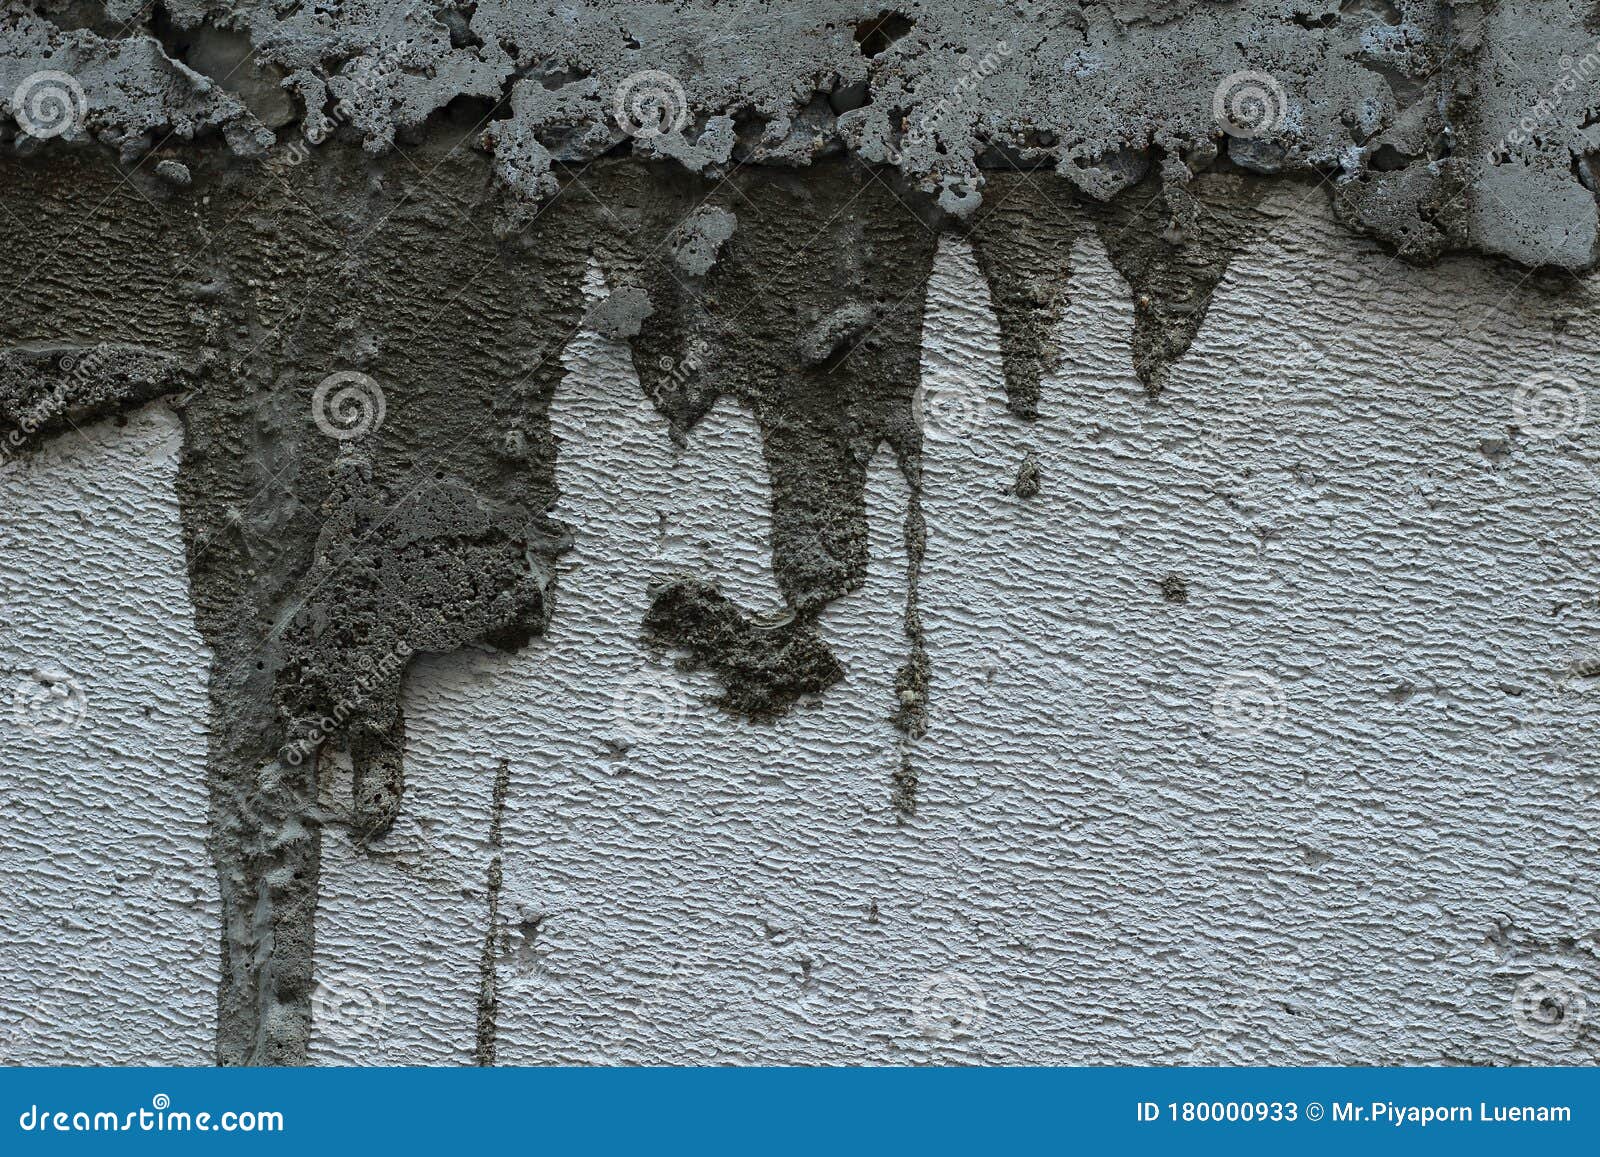 Close-up of Cement Wall on Grey Background. Stock Image - Image of blurred,  structure: 180000933